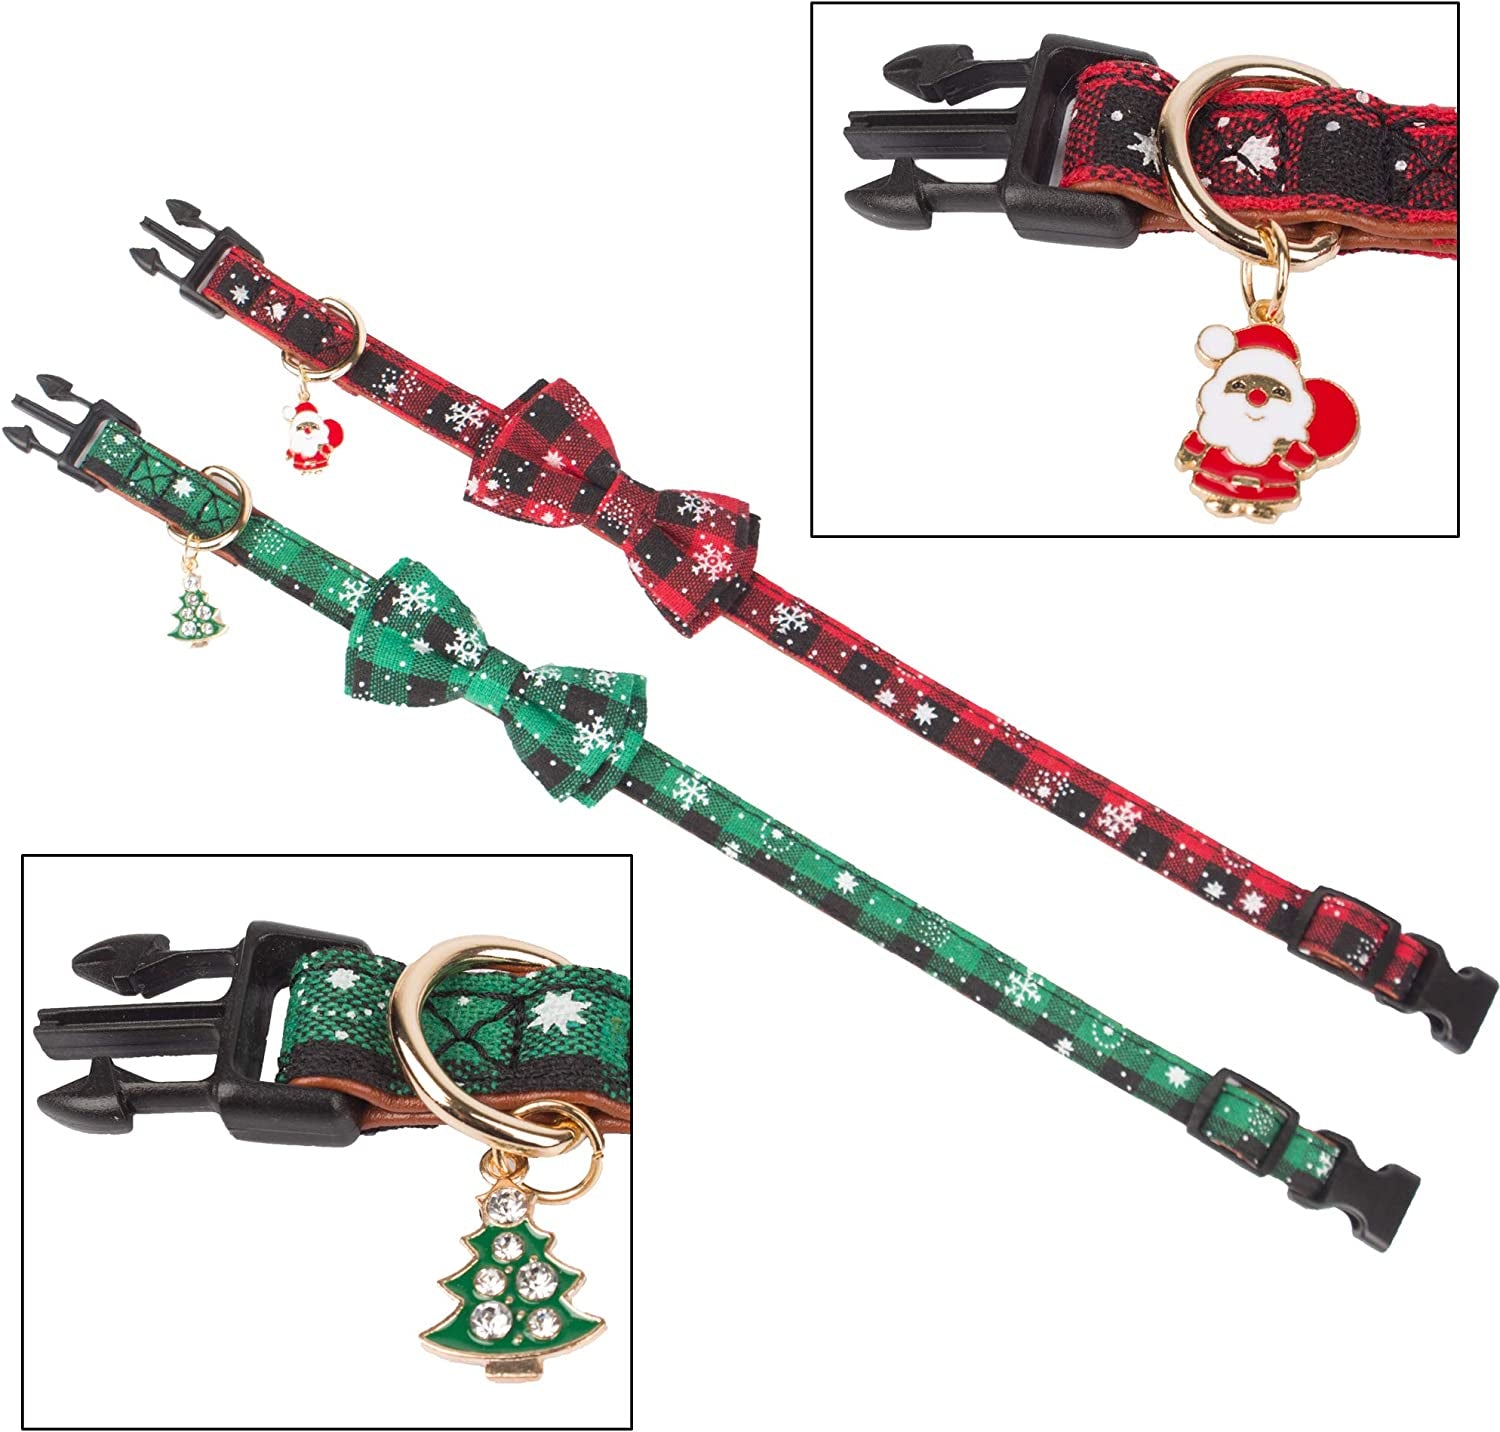 ADOGGYGO Christmas Dog Collar with Bow Tie Adjustable Bowtie Plaid Red Green Dog Pet Collars for Small Medium Large Dogs (Small, Red&Green&White) Animals & Pet Supplies > Pet Supplies > Dog Supplies > Dog Apparel ADOGGYGO   